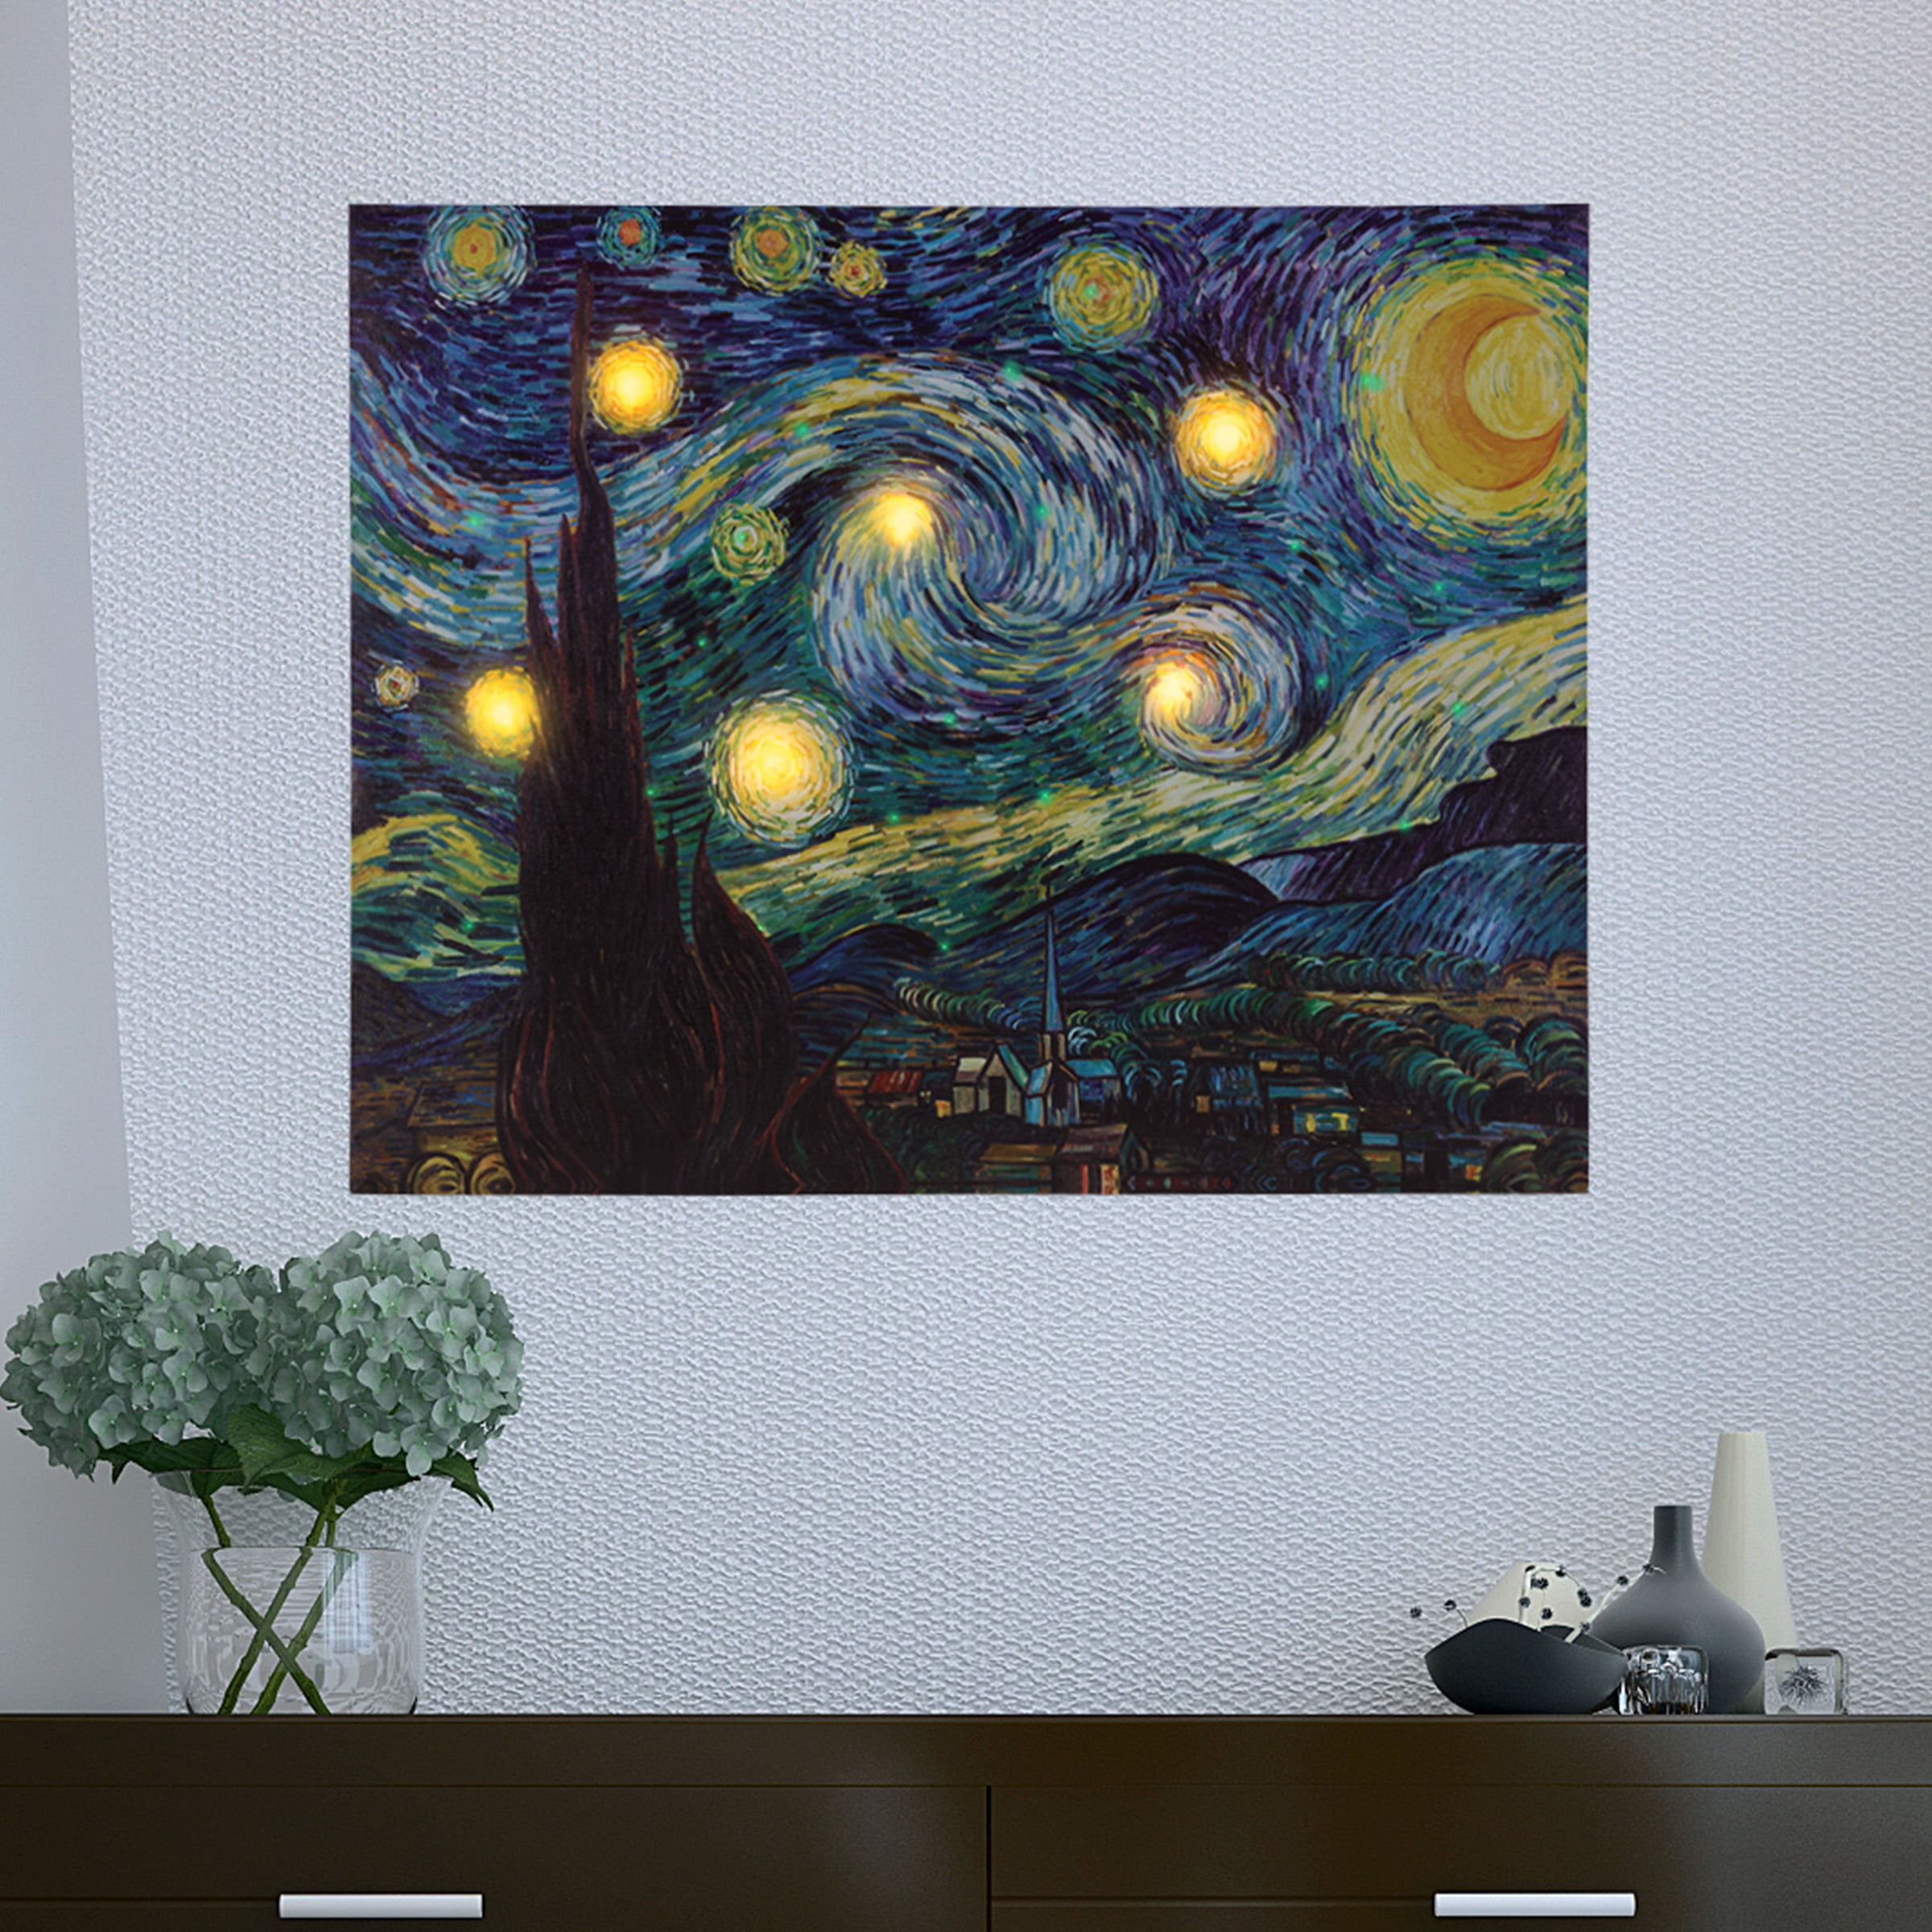 Lighted Wall Art Canvas With Timer Van, Lighted Wall Art Decor